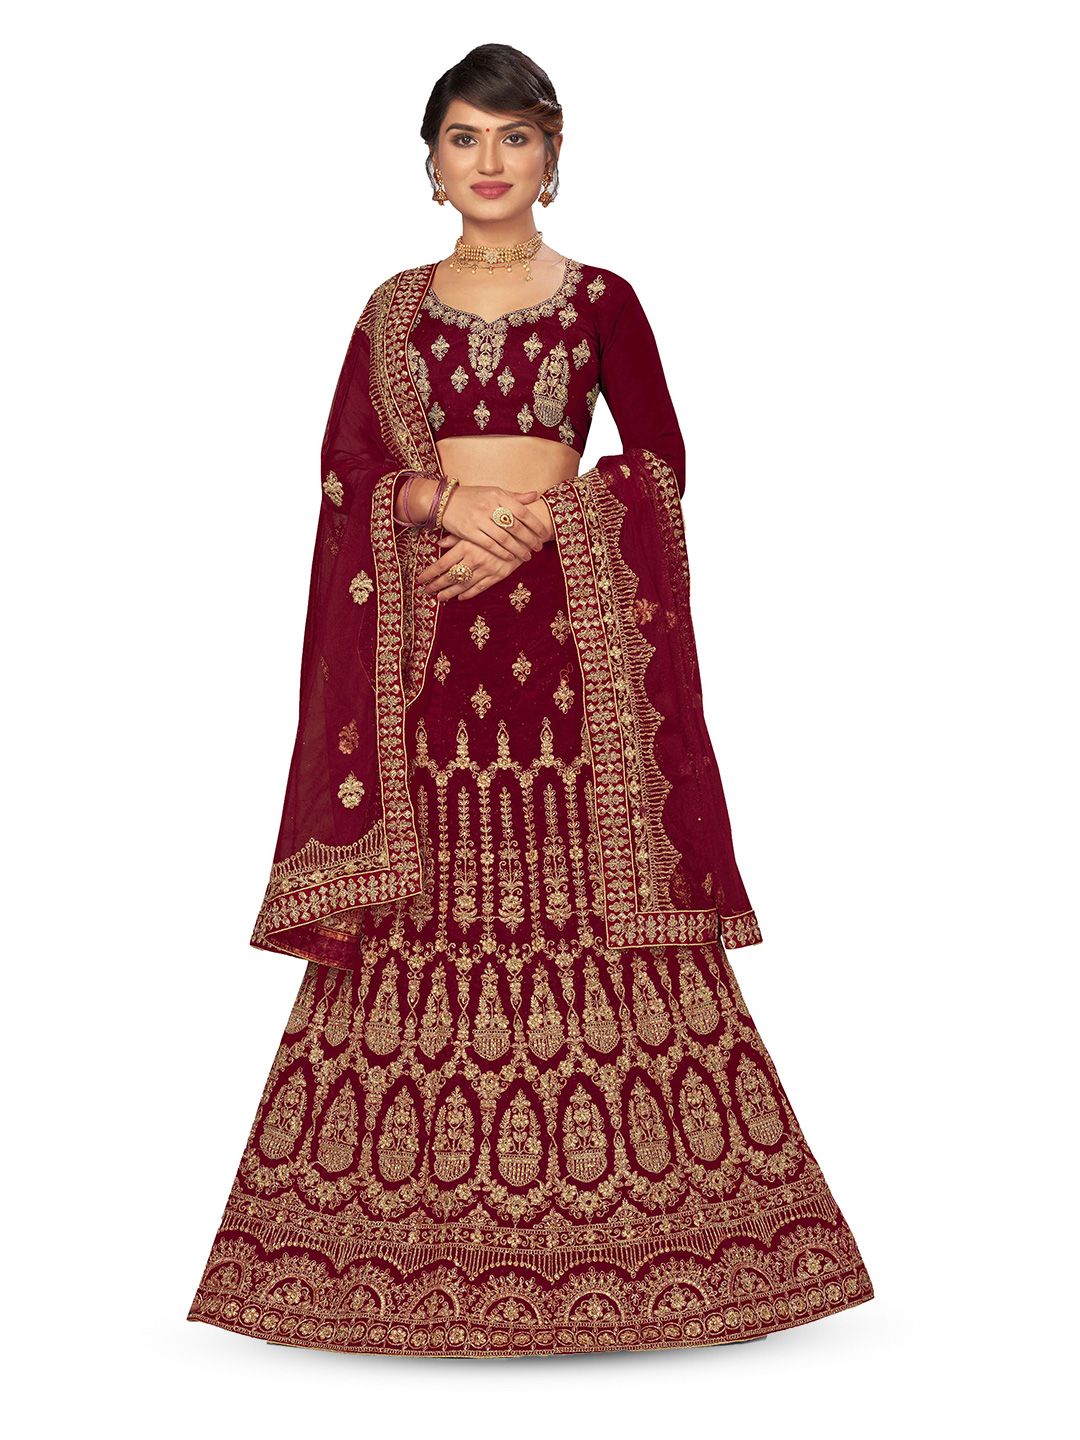 MANVAA Maroon & Beige Embroidered Thread Work Semi-Stitched Lehenga & Unstitched Blouse With Dupatta Price in India